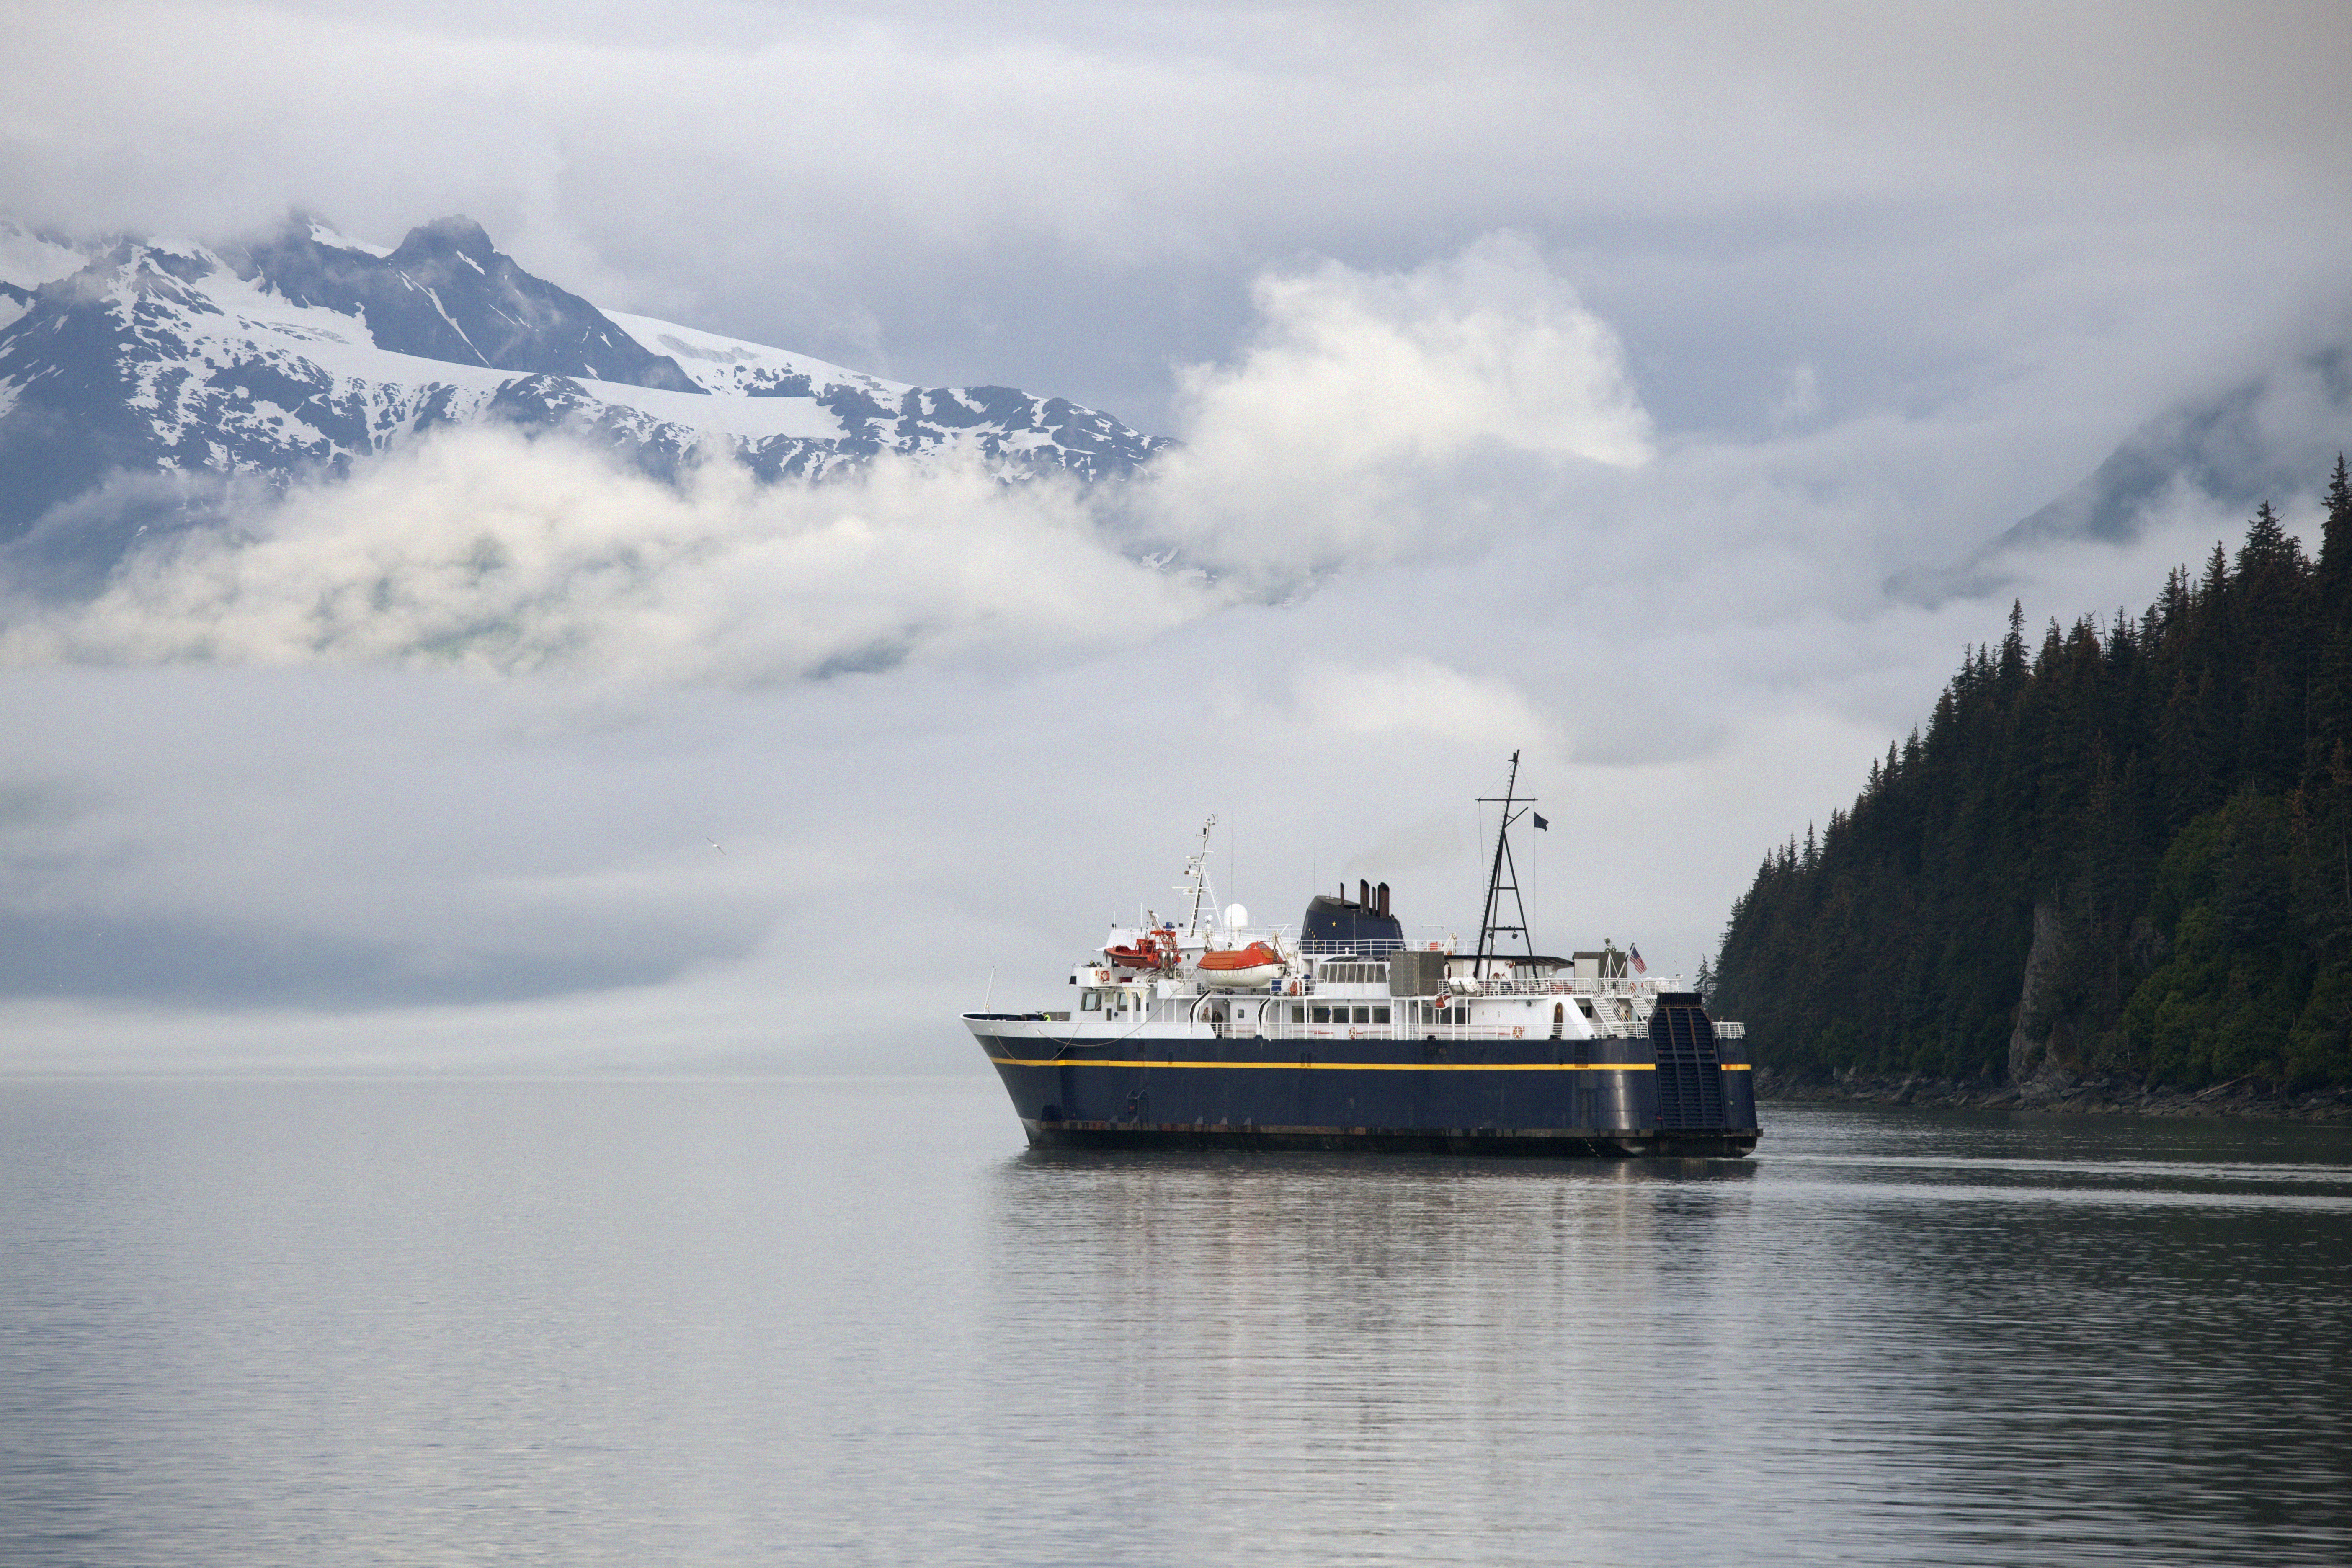 "Alaska Marine Highway ferry ship leaving Valdez Harbor, heading out to Prince William Sound waters."